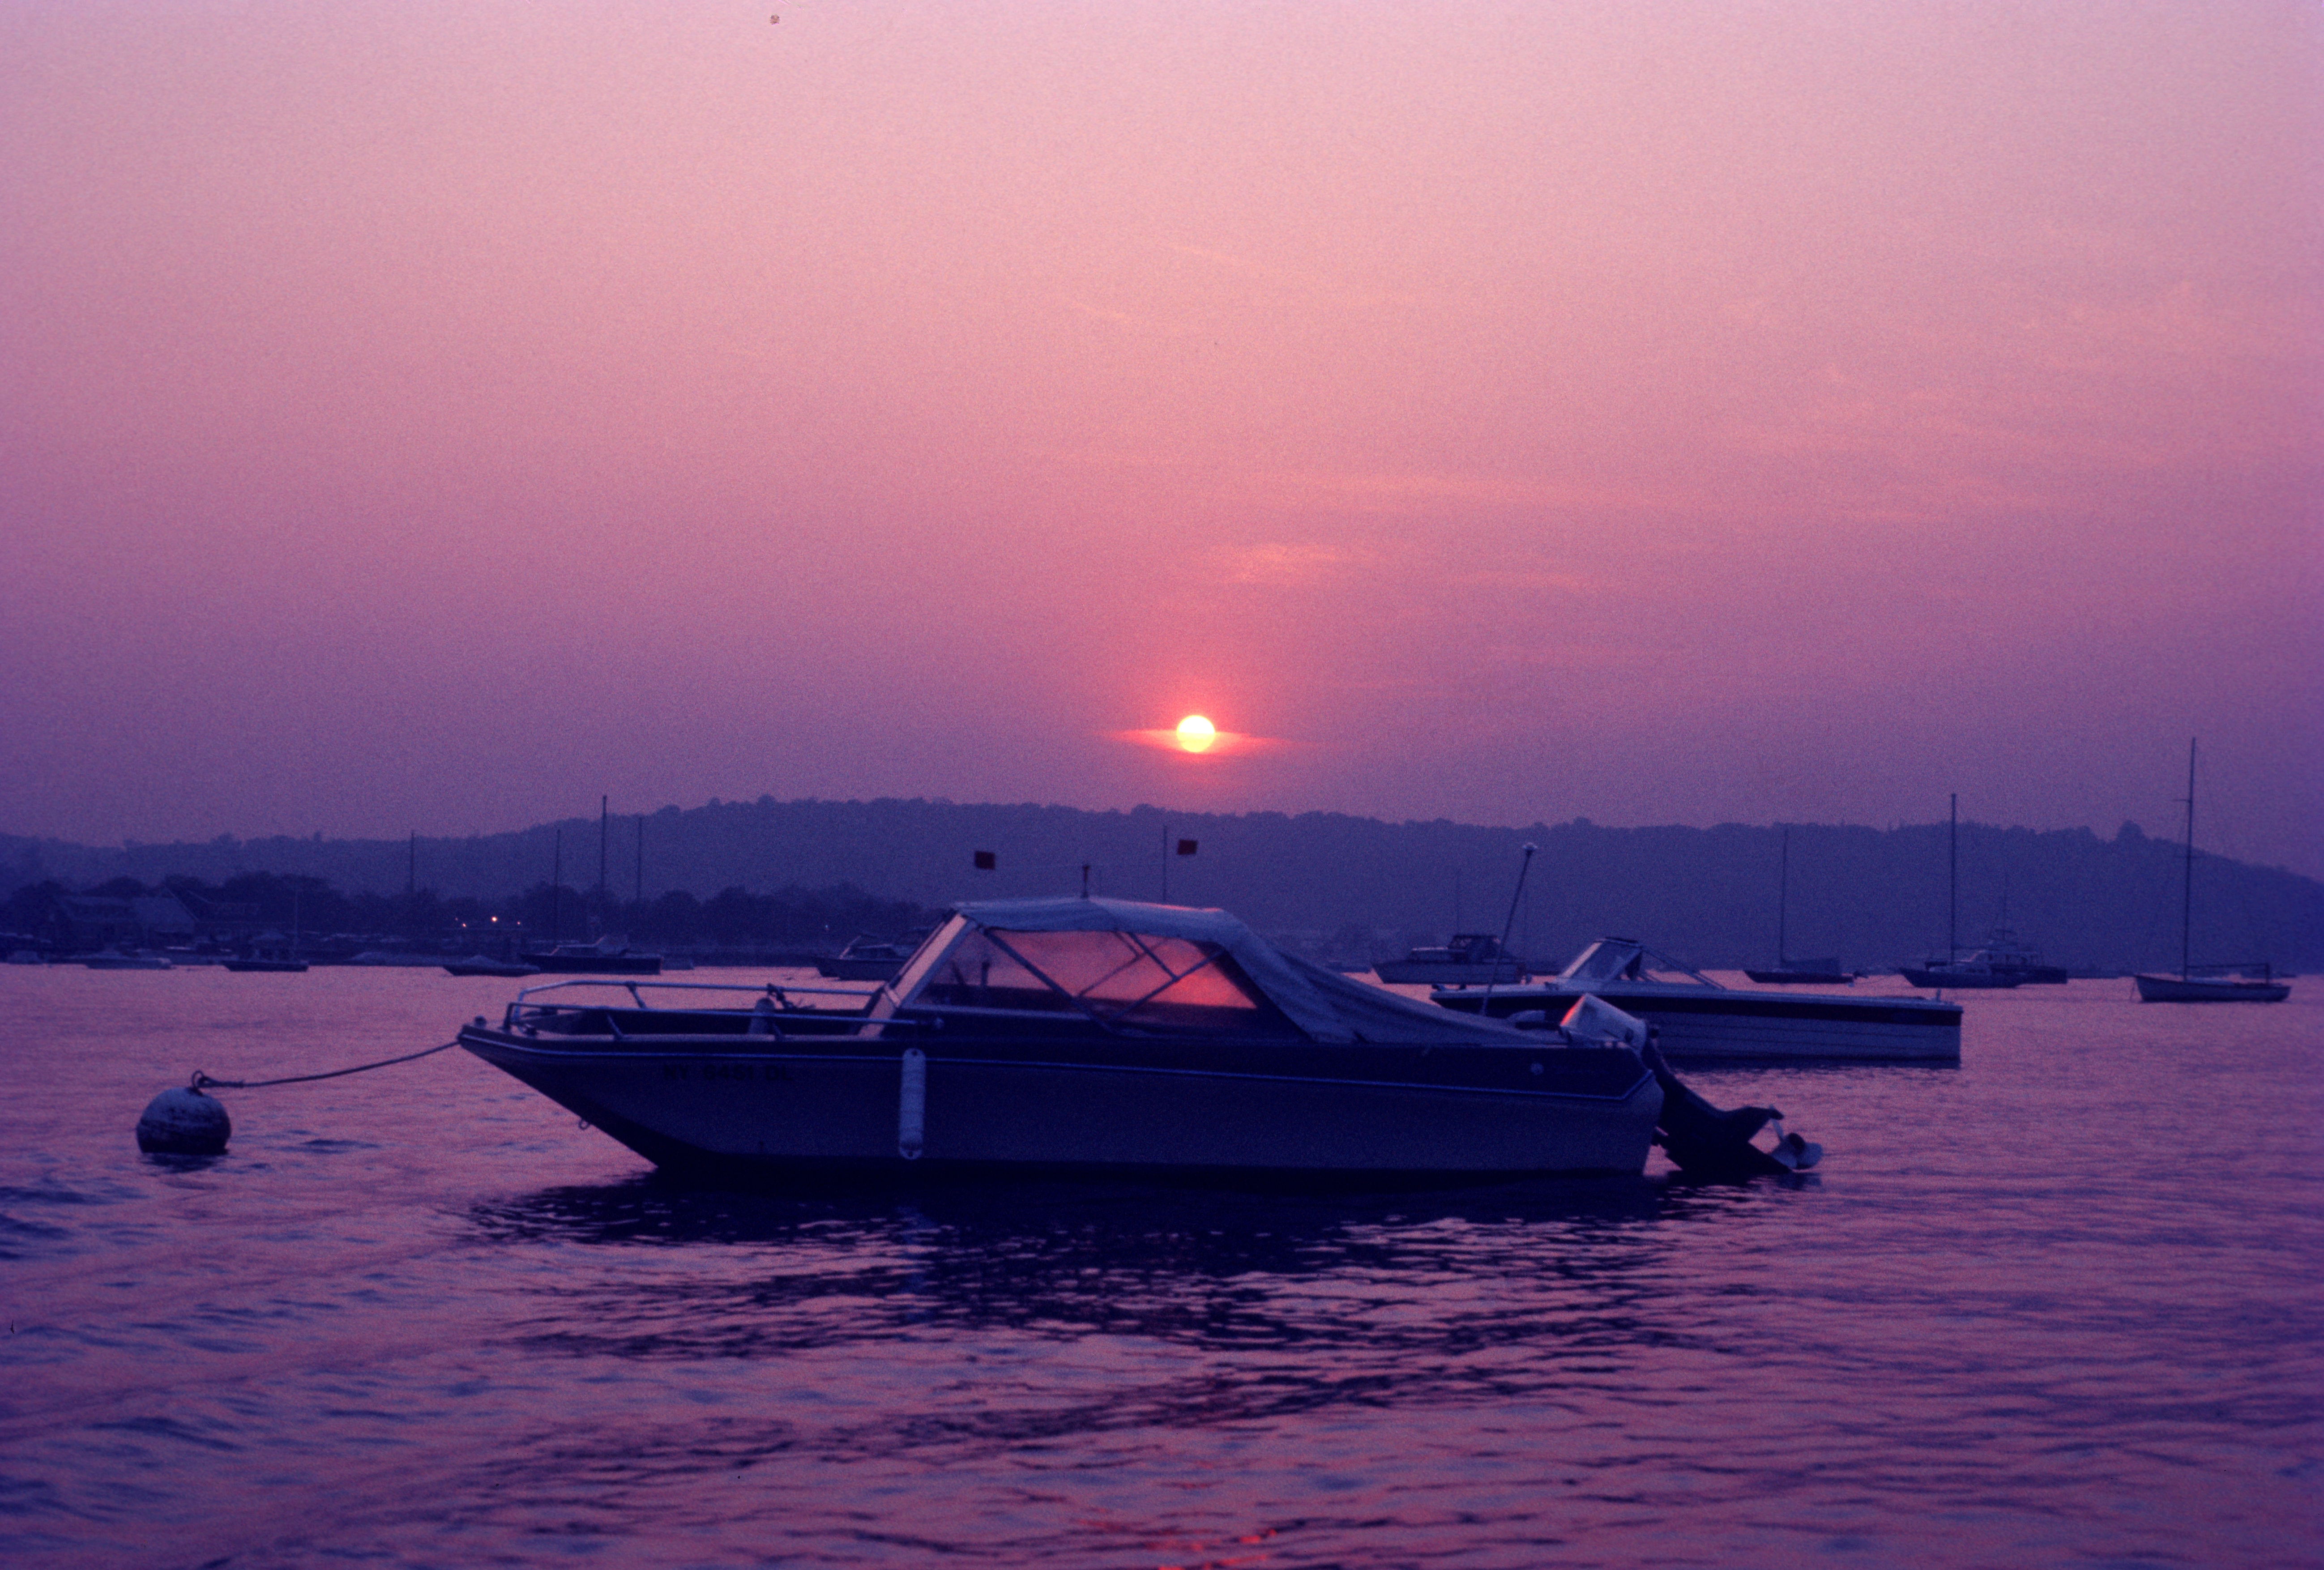 A boat moored offshore is illuminated by a pick sunset